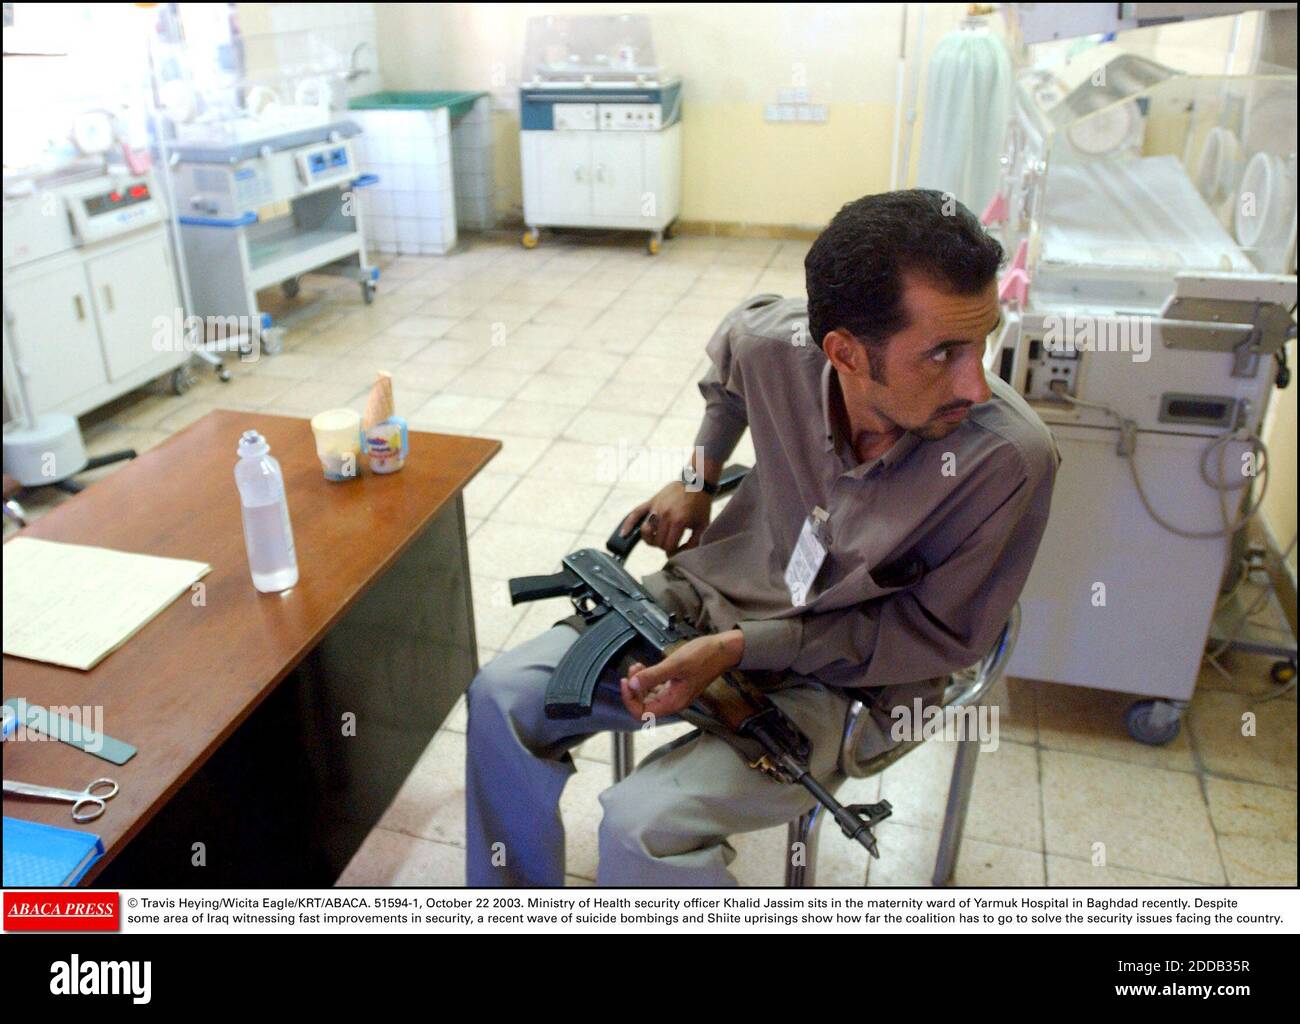 NO FILM, NO VIDEO, NO TV, NO DOCUMENTARY - © Travis Heying/Wicita Eagle/KRT/ABACA. 51594-1, October 22 2003. Ministry of Health security officer Khalid Jassim sits in the maternity ward of Yarmuk Hospital in Baghdad recently. Despite some area of Iraq witnessing fast improvements in security, a re Stock Photo